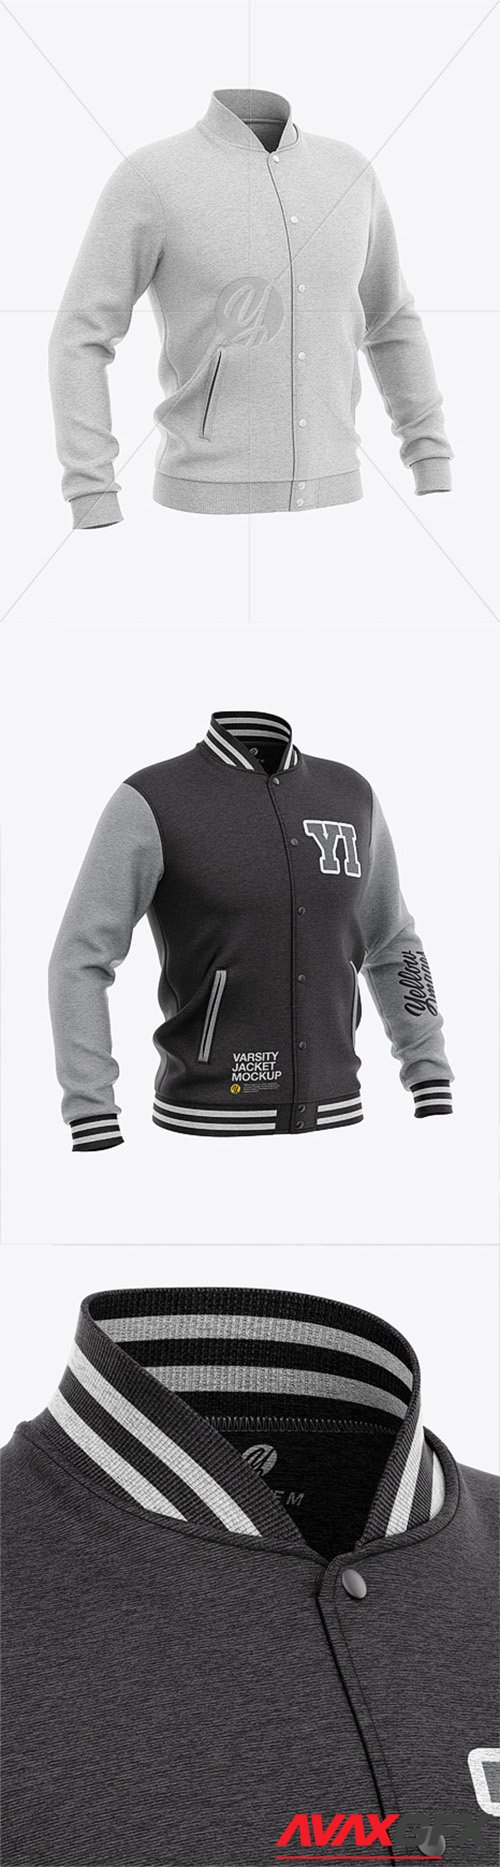 Download Men's Bomber Jacket Mockup - Front View 42249 » AVAXGFX ...